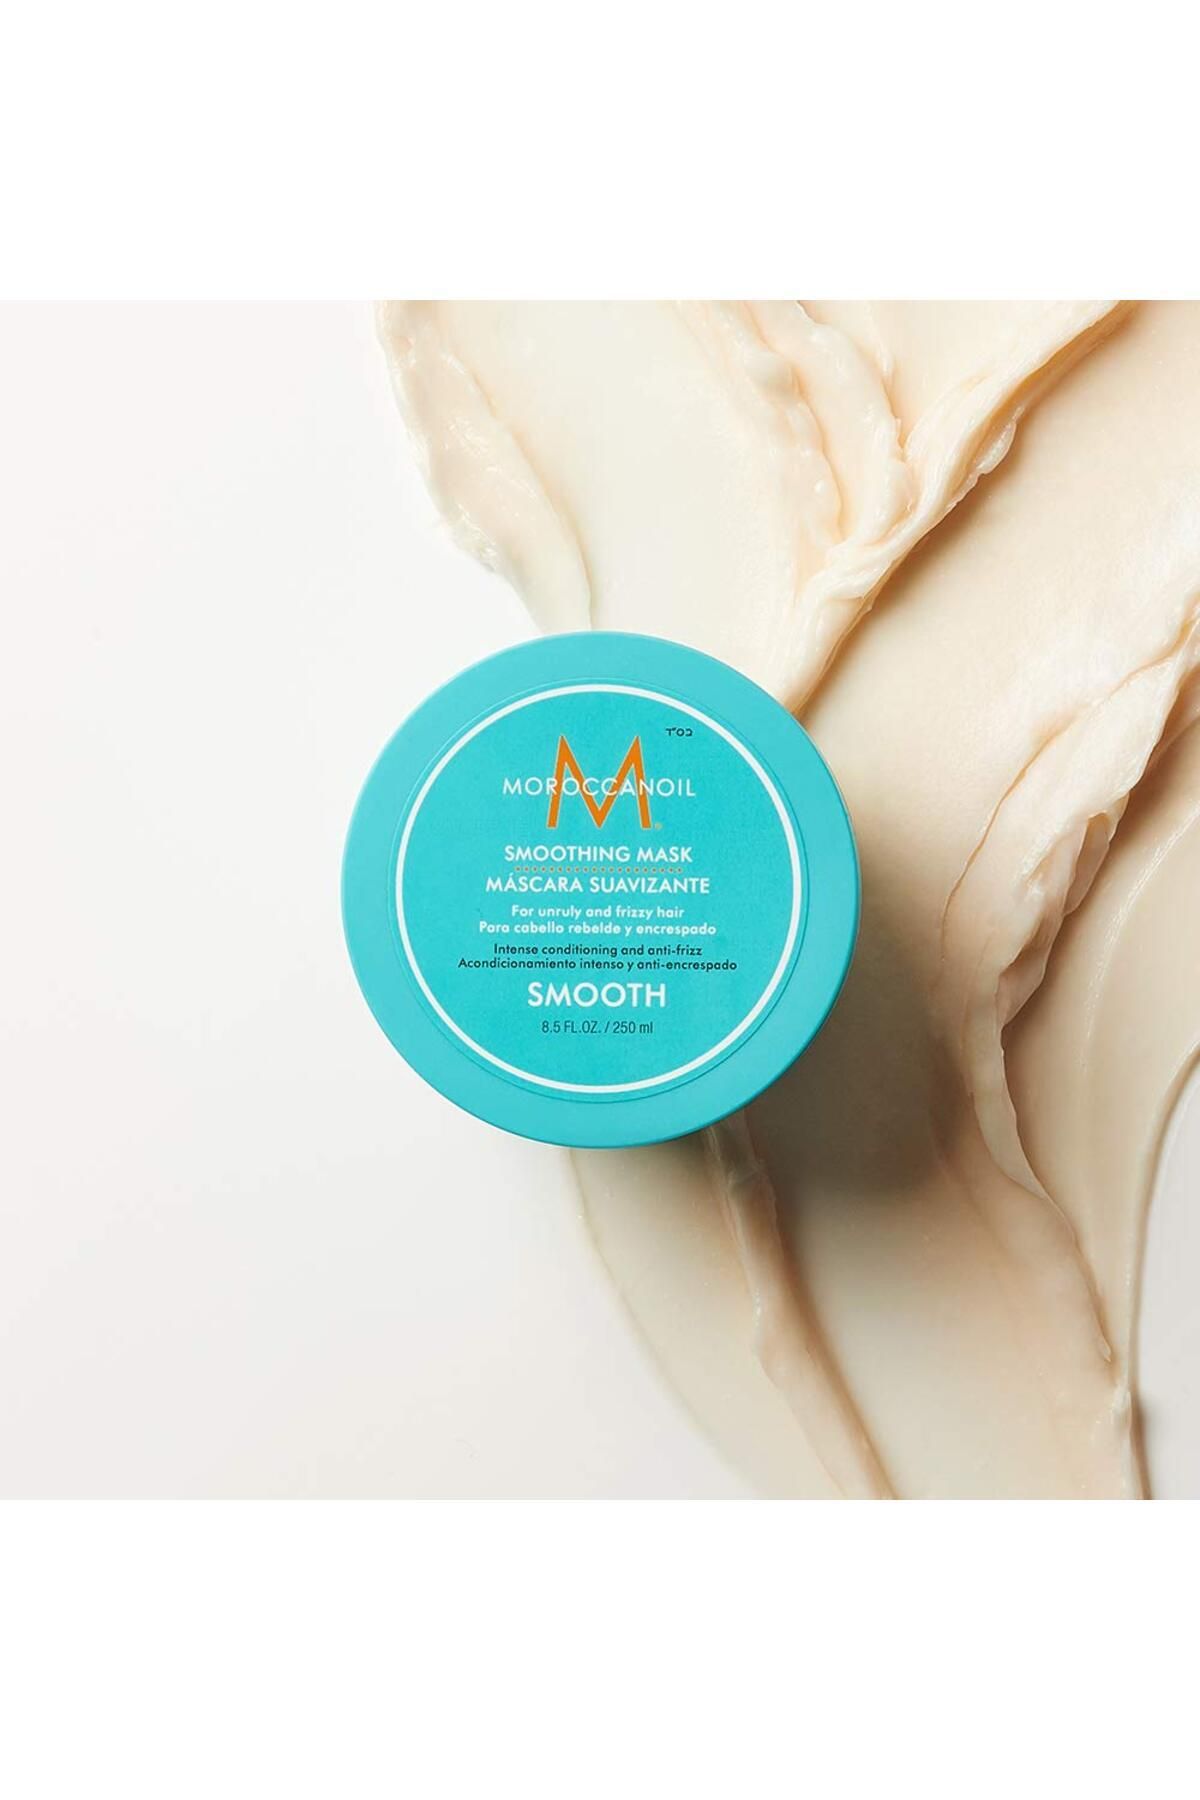 Moroccanoil SMOOTH Antioxidant Concentrated Hair Mask for Unruly & Frizzy Hair 8.5oz Trusty1